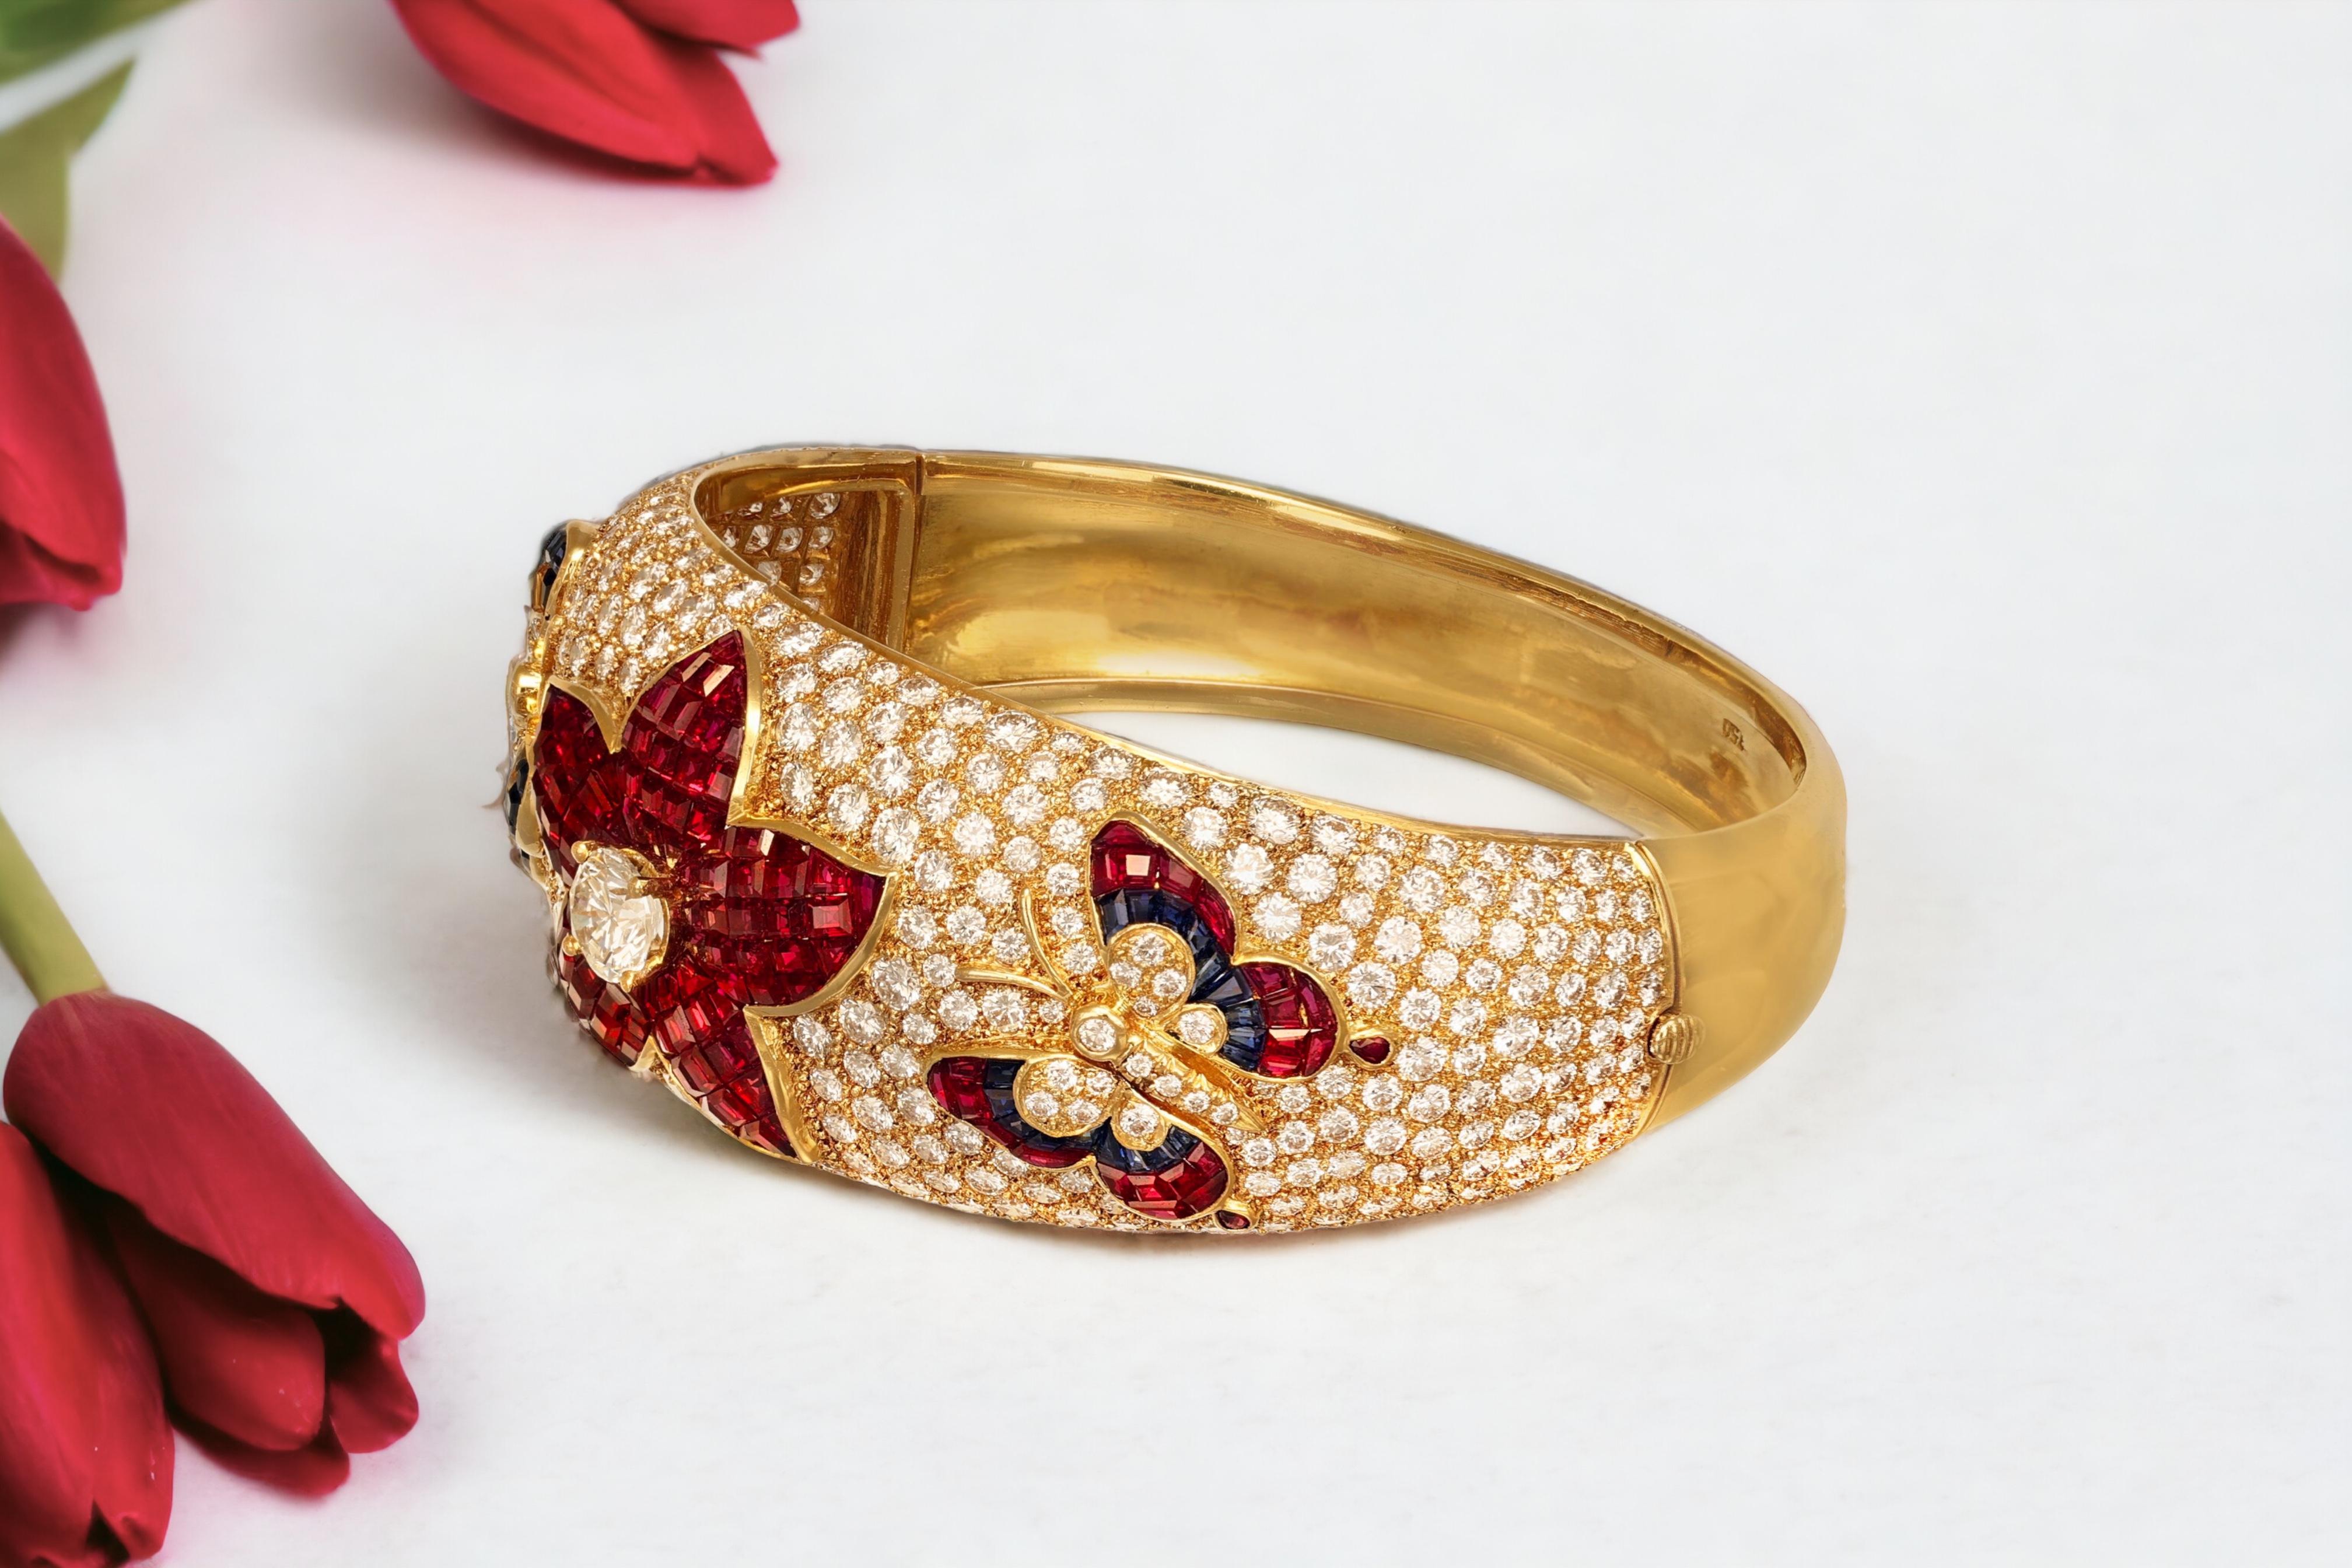 18 kt. Yellow Gold Wide Bangle Bracelet With Diamonds, Rubies, Sapphires For Sale 9